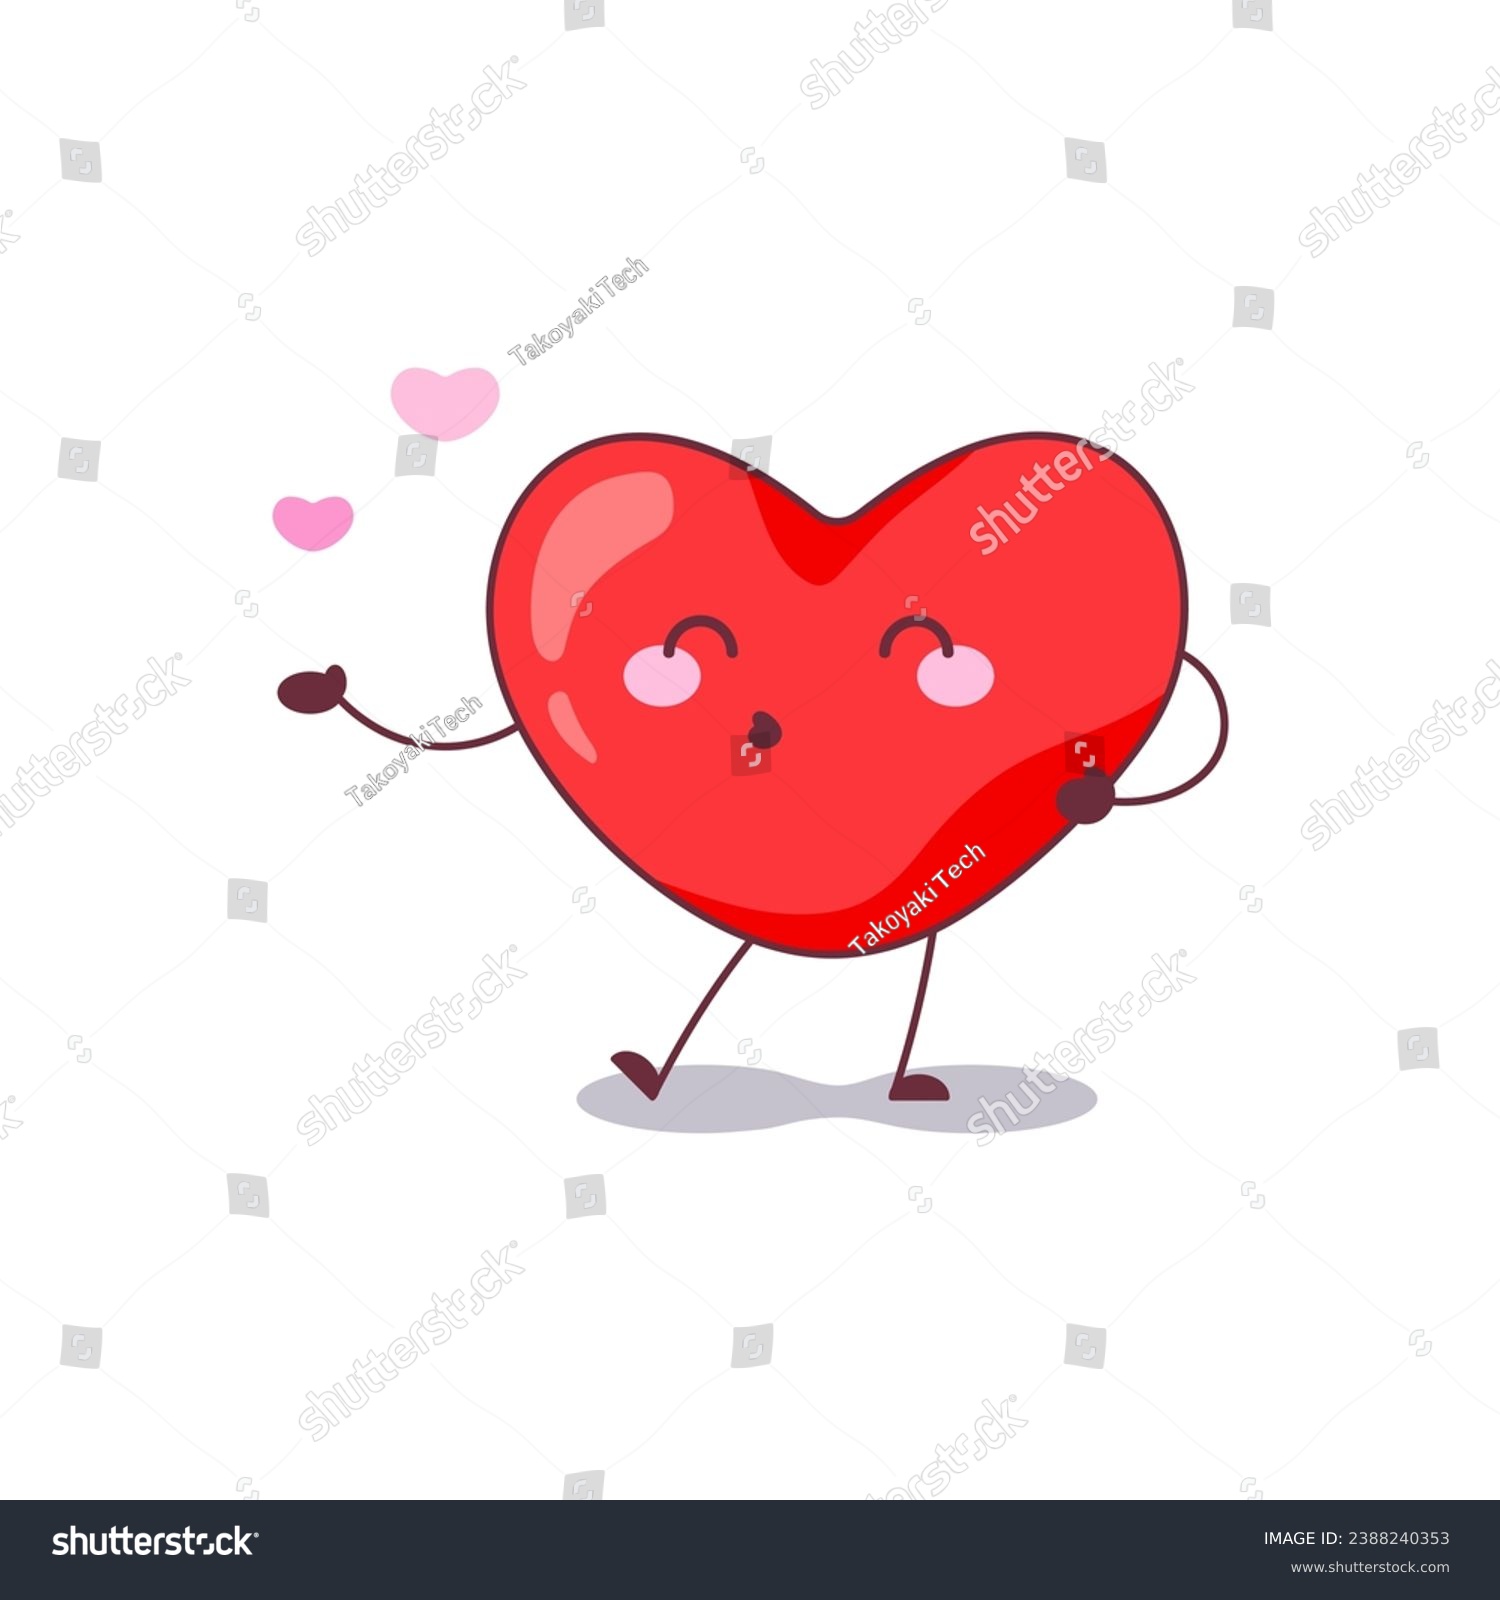 SVG of Blowing Kiss Heart Character Icon. Vector Illustration of a Love Heart Mascot Sending a Kiss, Ideal for Valentine's Day and Romantic Expressions. svg